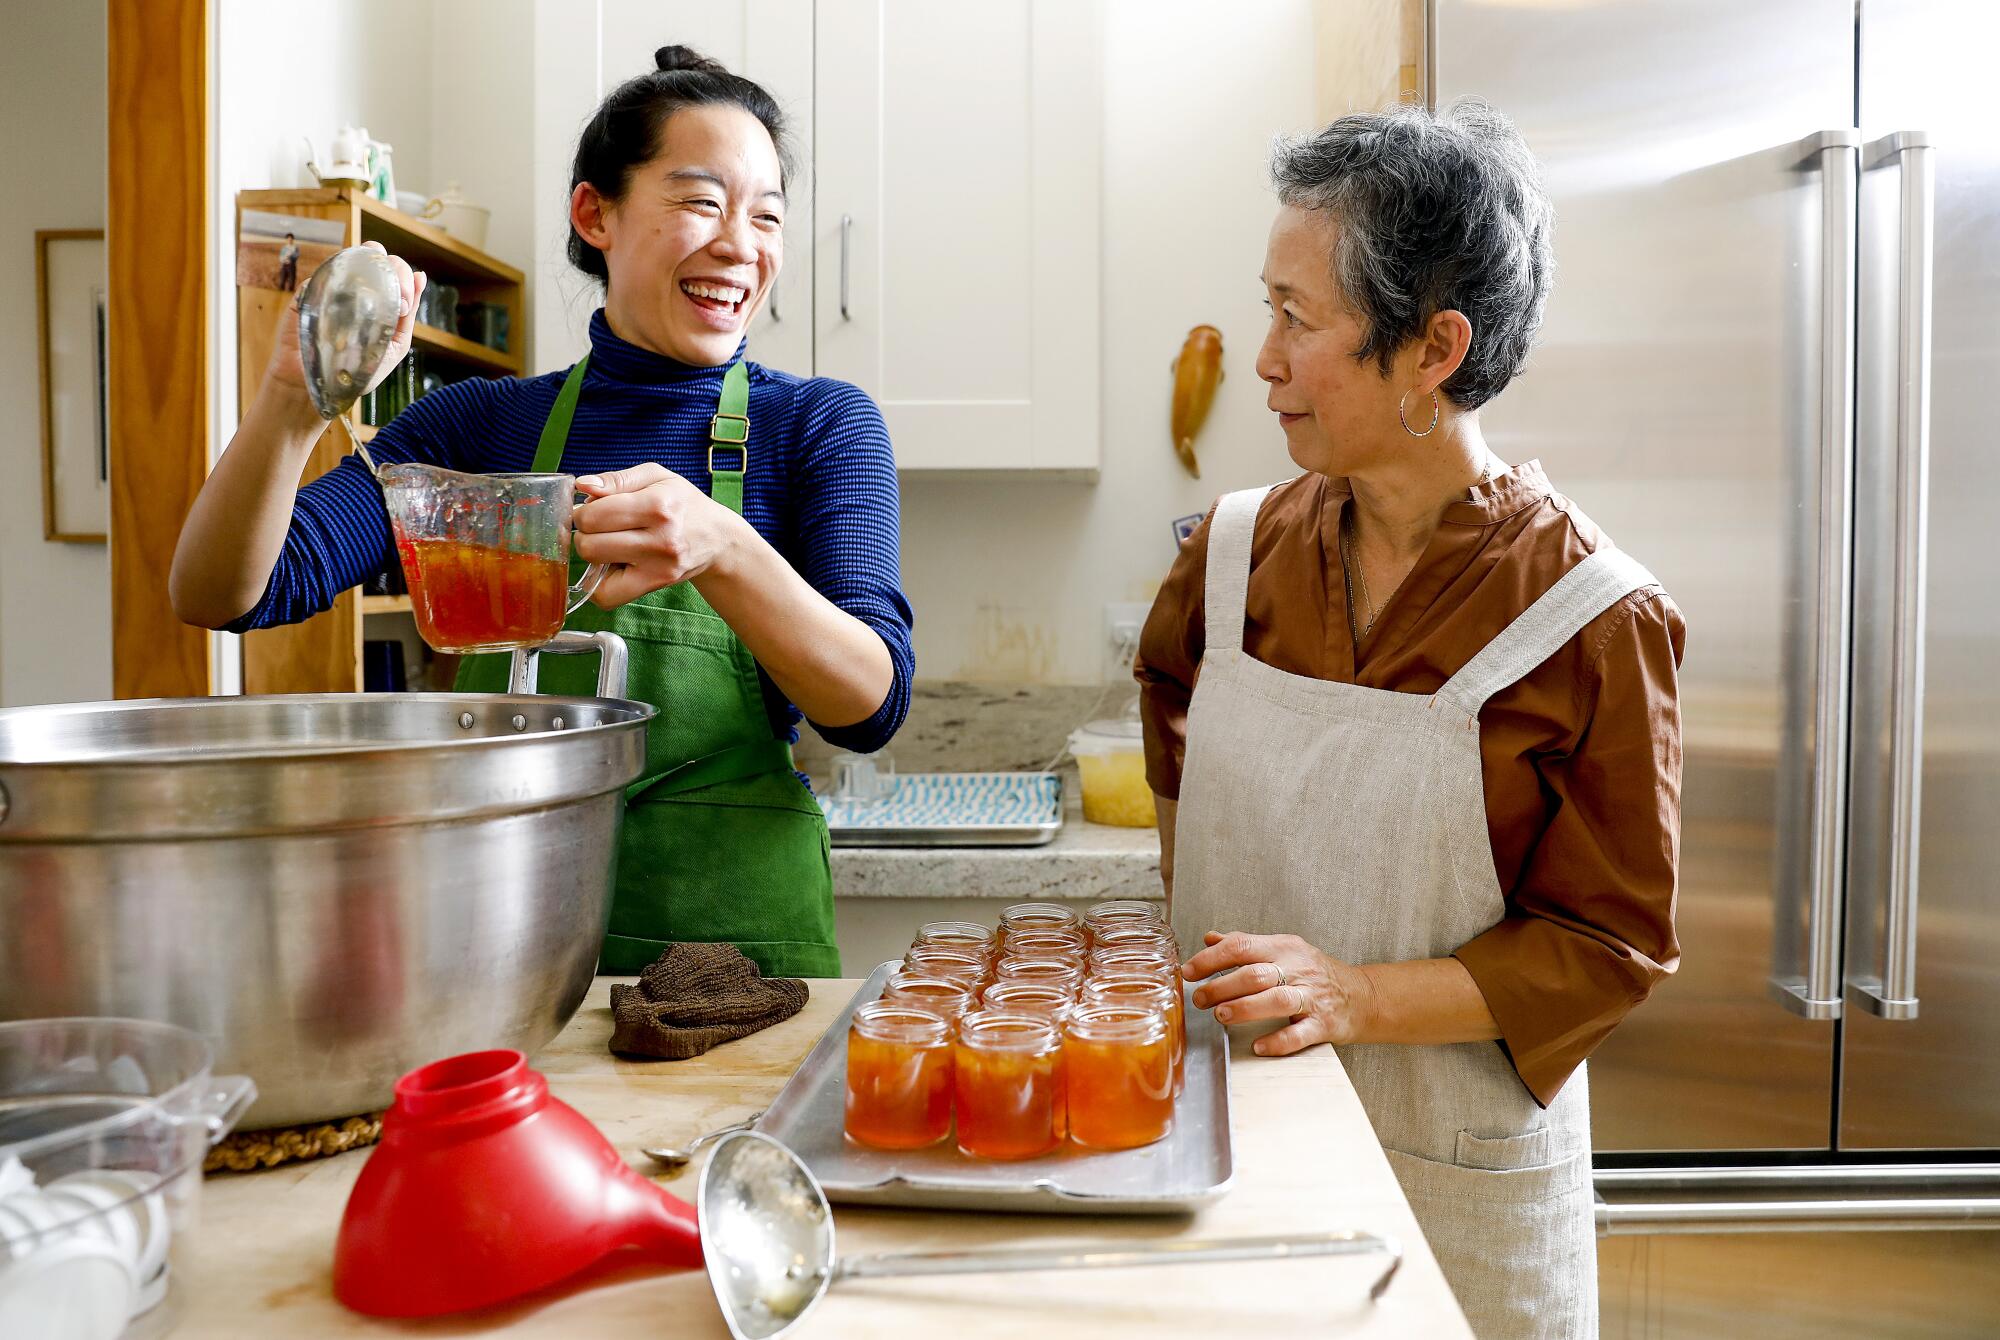 Alaina Wong, left, helps Sonoko Sakai, right, a Japanese cooking instructor and cookbook author, make oro blanco marmalade.